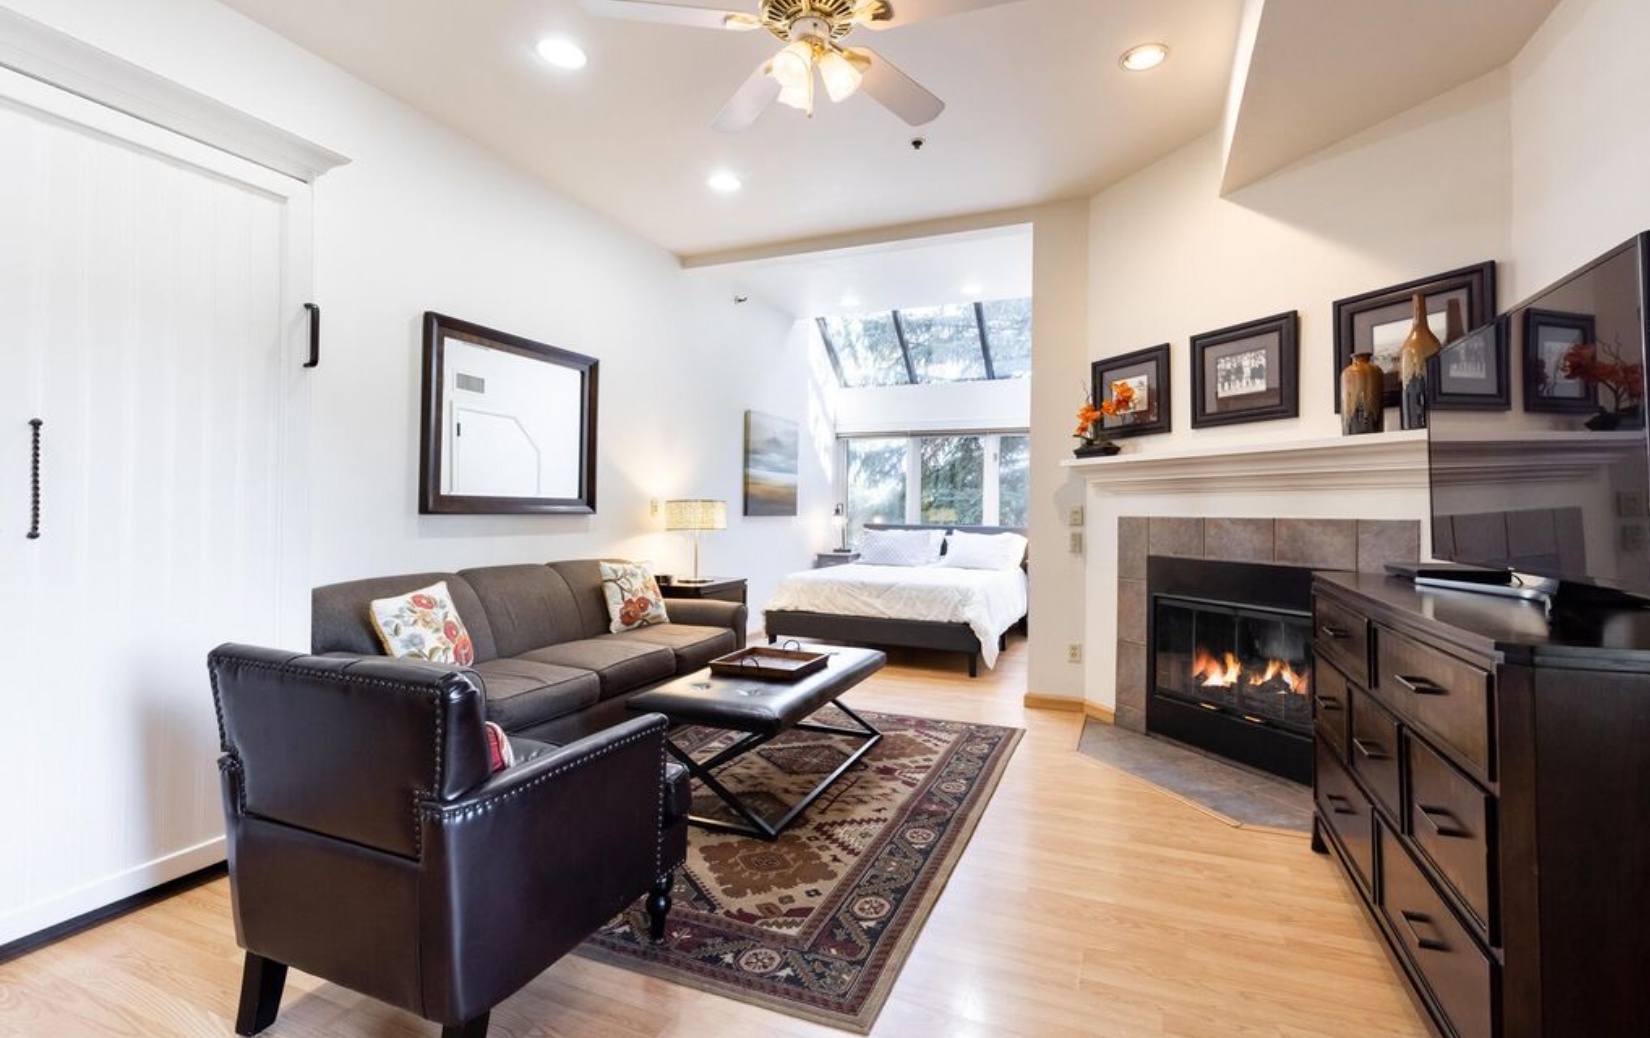 Park City Vacation Rentals, Studio Condo at The Lodge at Mountain Village - This bright, comfortable studio is big on location - Walk outside to enjoy world-class skiing at Park City Mountain Resort!